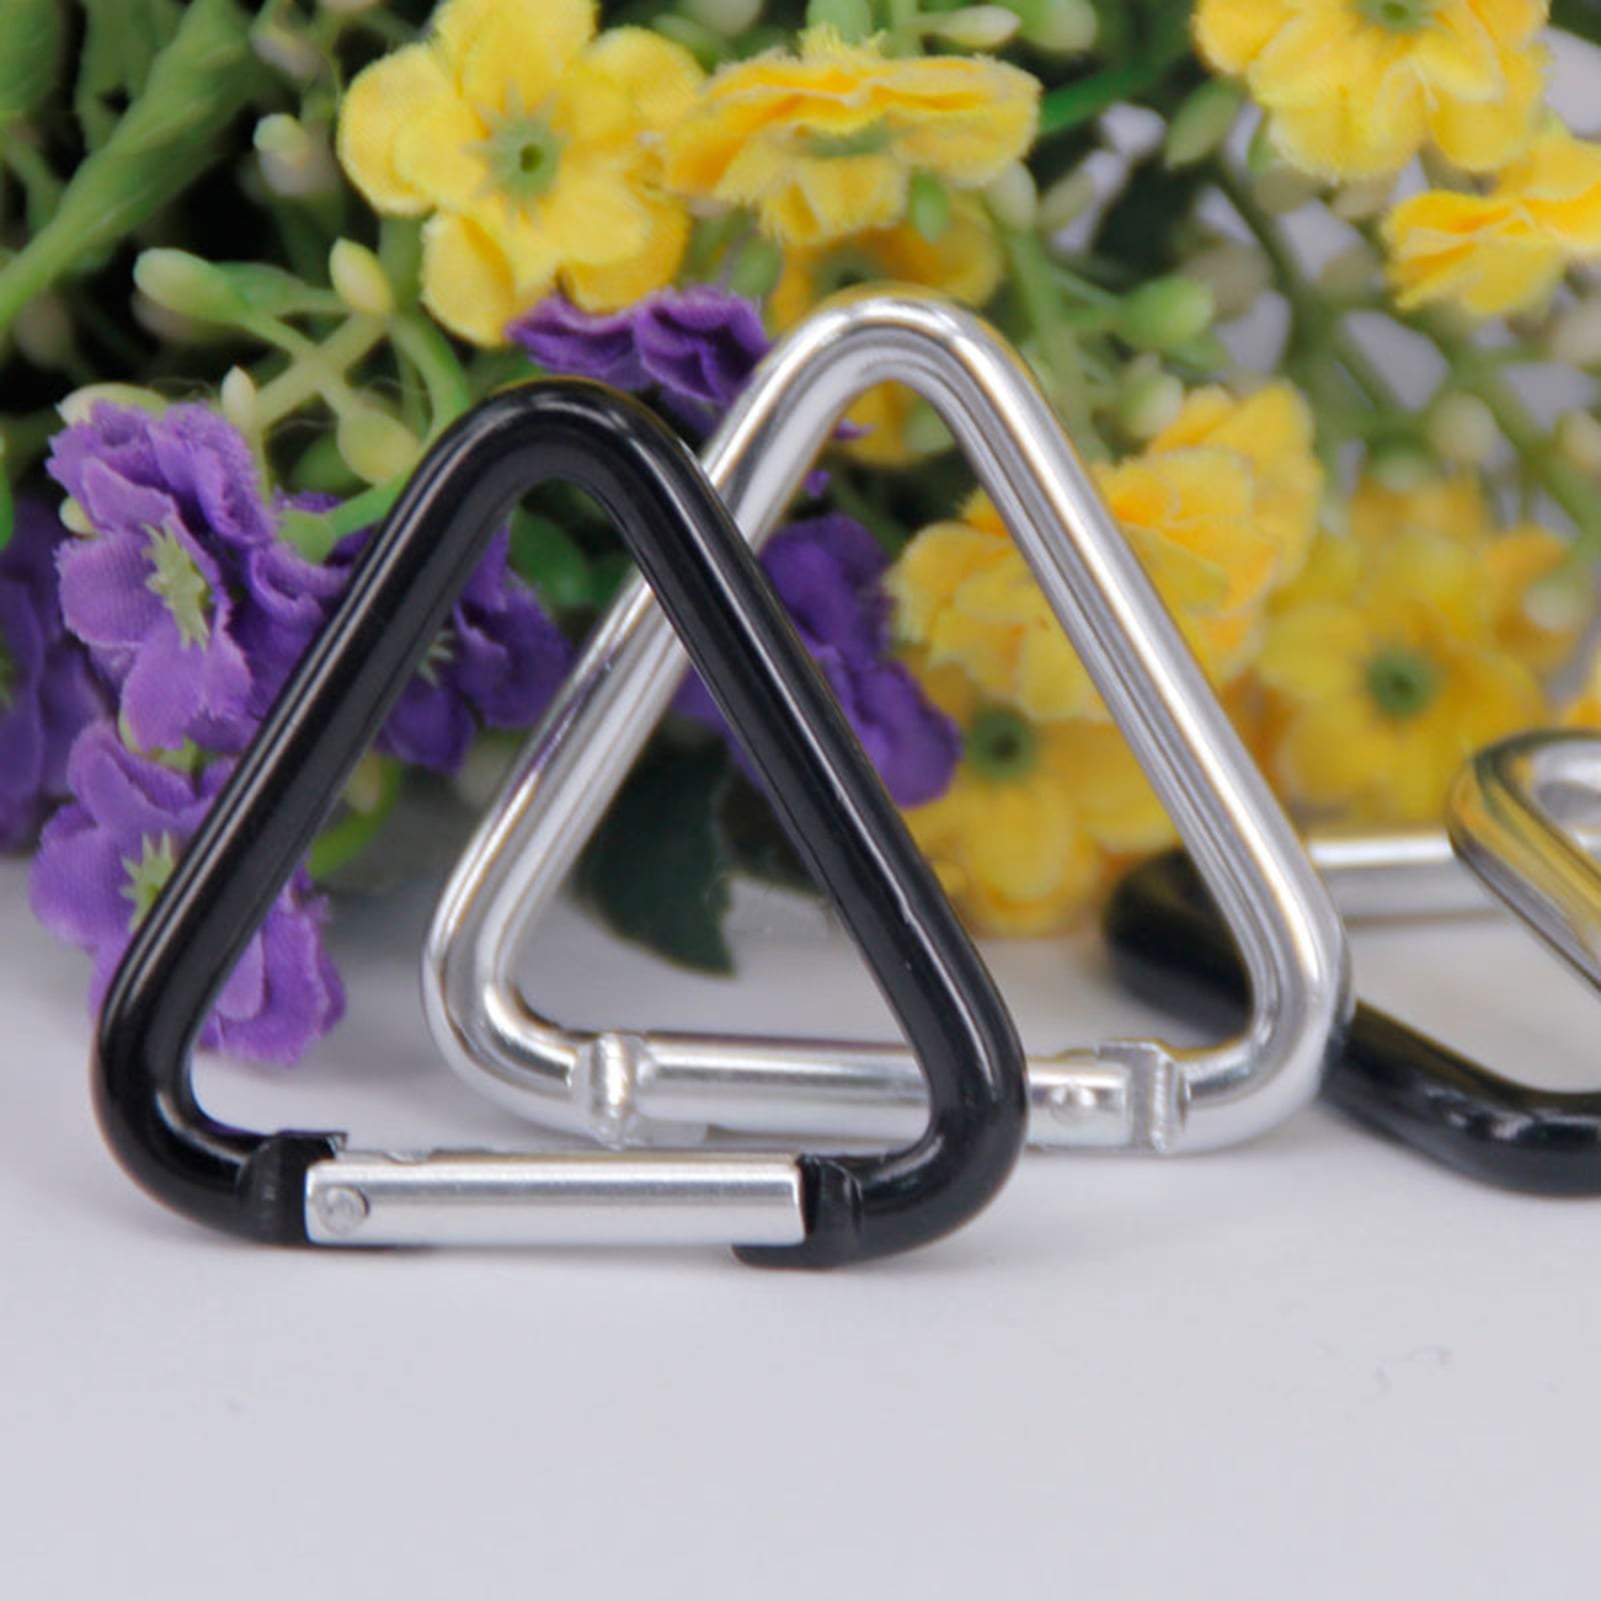 New Hard 5Pcs/Lot S Type Backpack Clasps Climbing Carabiners EDC Keychain US 